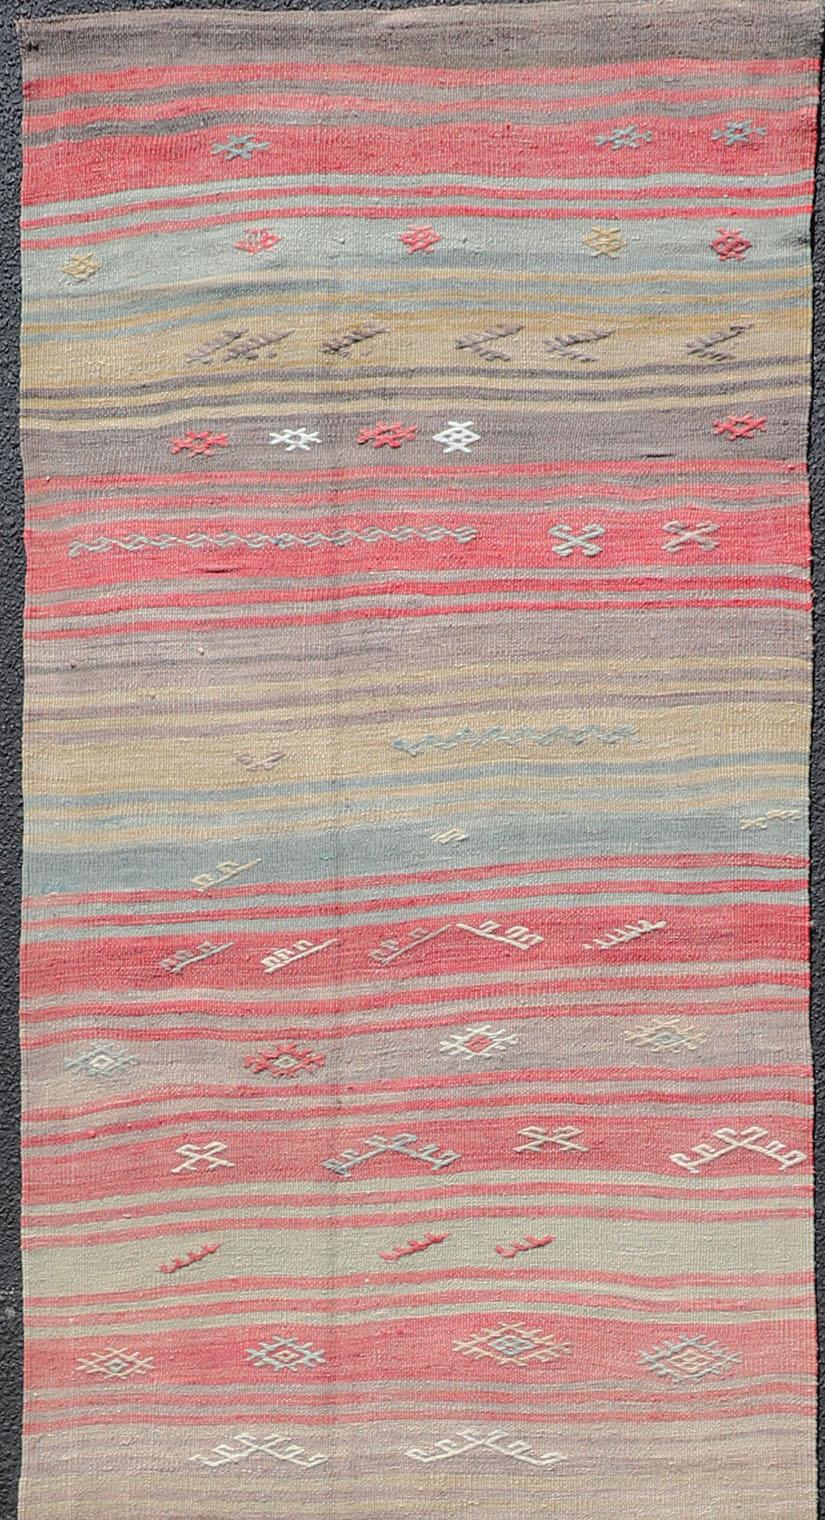 Stripe design flat-weave vintage runner from Turkey, Keivan Woven Arts / rug EN-1311, country of origin / type: Iran / Kilim, circa 1940.

Featuring a dynamic stripe design, this unique 1940s Kilim runner showcases an array of vibrant color tones,